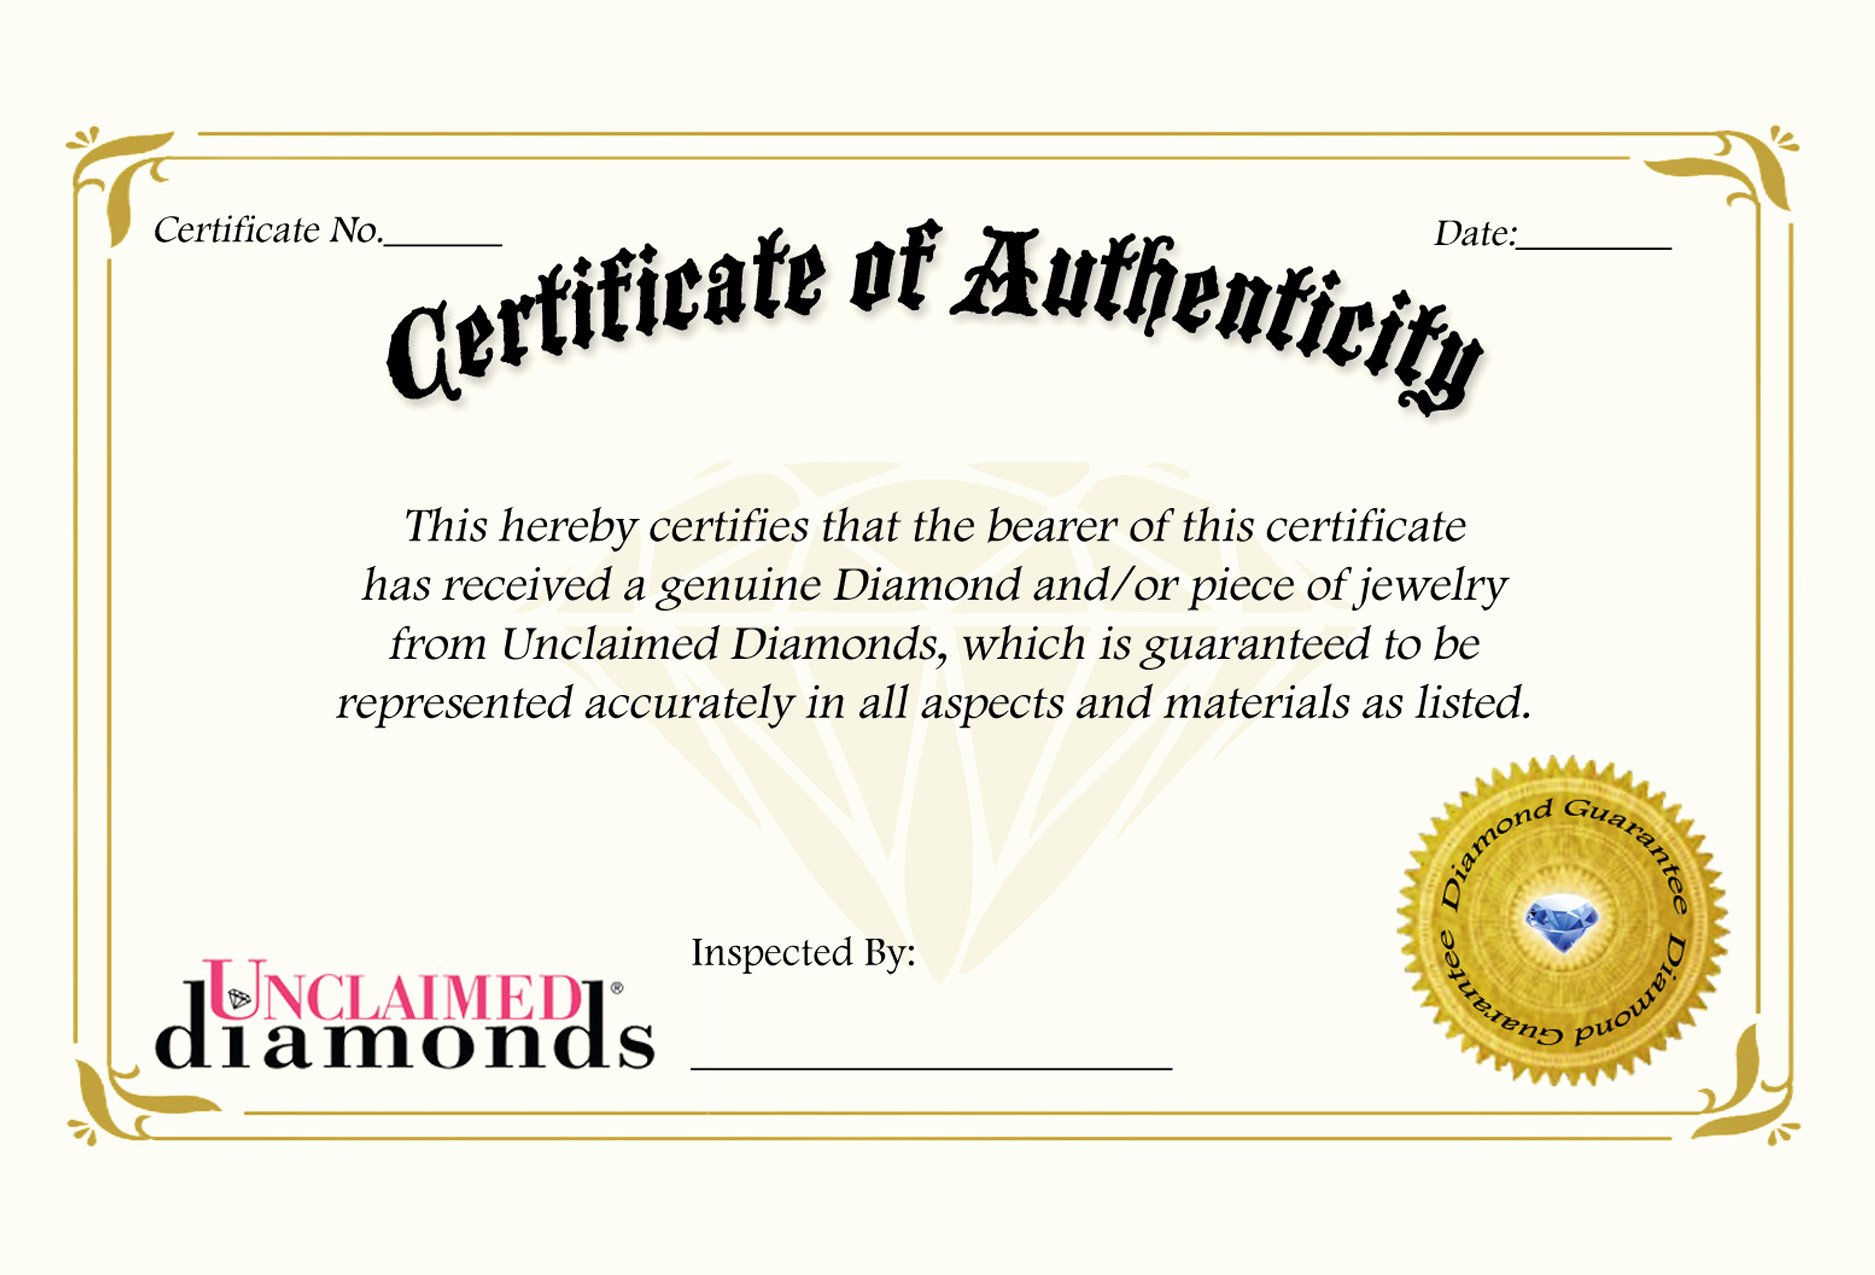 Unclaimed Diamonds Certificate Of Authenticity